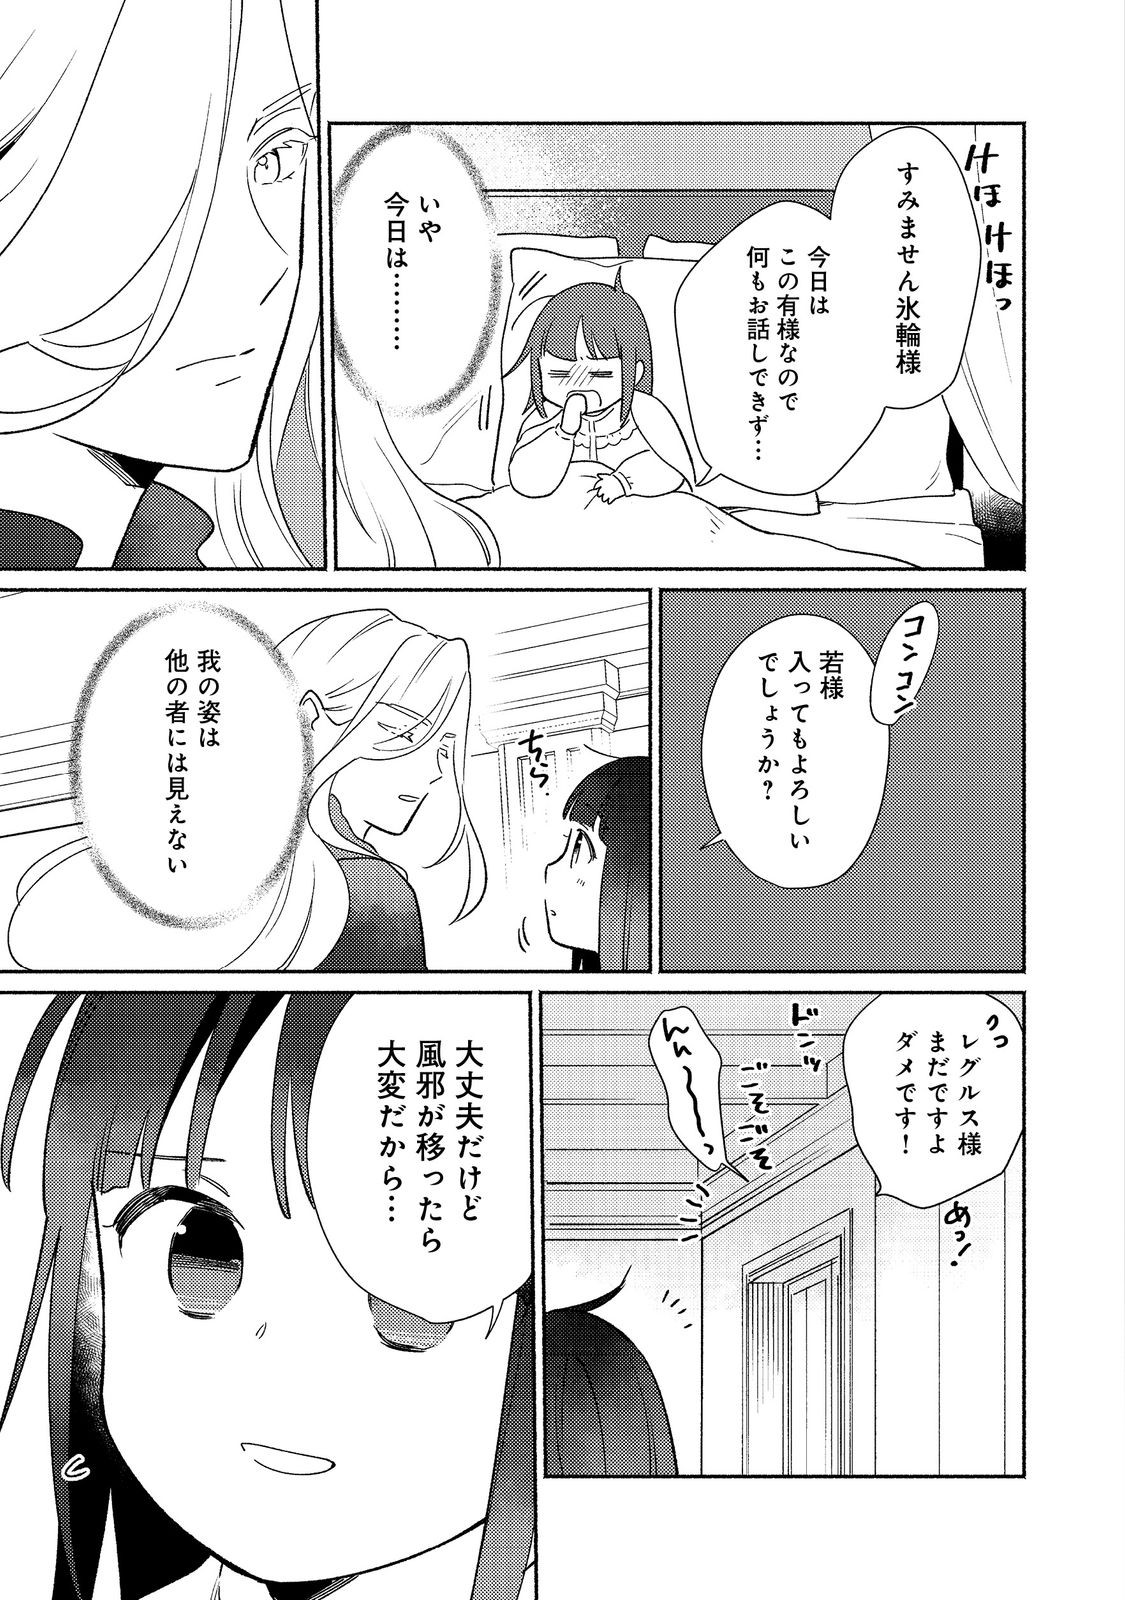 I’m the White Pig Nobleman 第22.2話 - Page 1